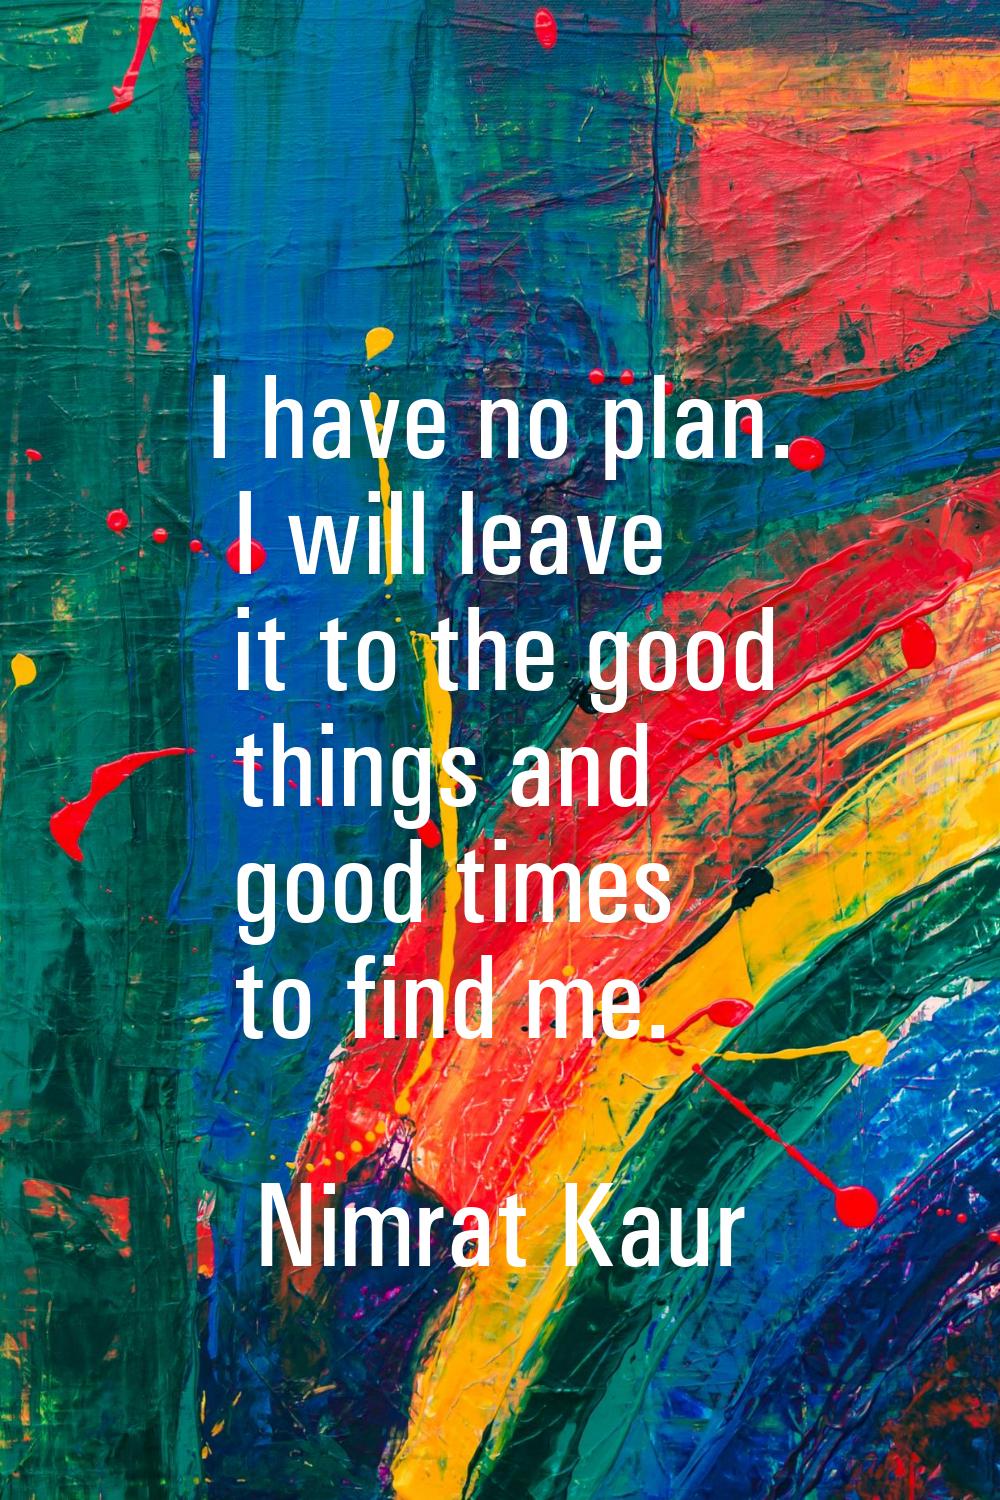 I have no plan. I will leave it to the good things and good times to find me.